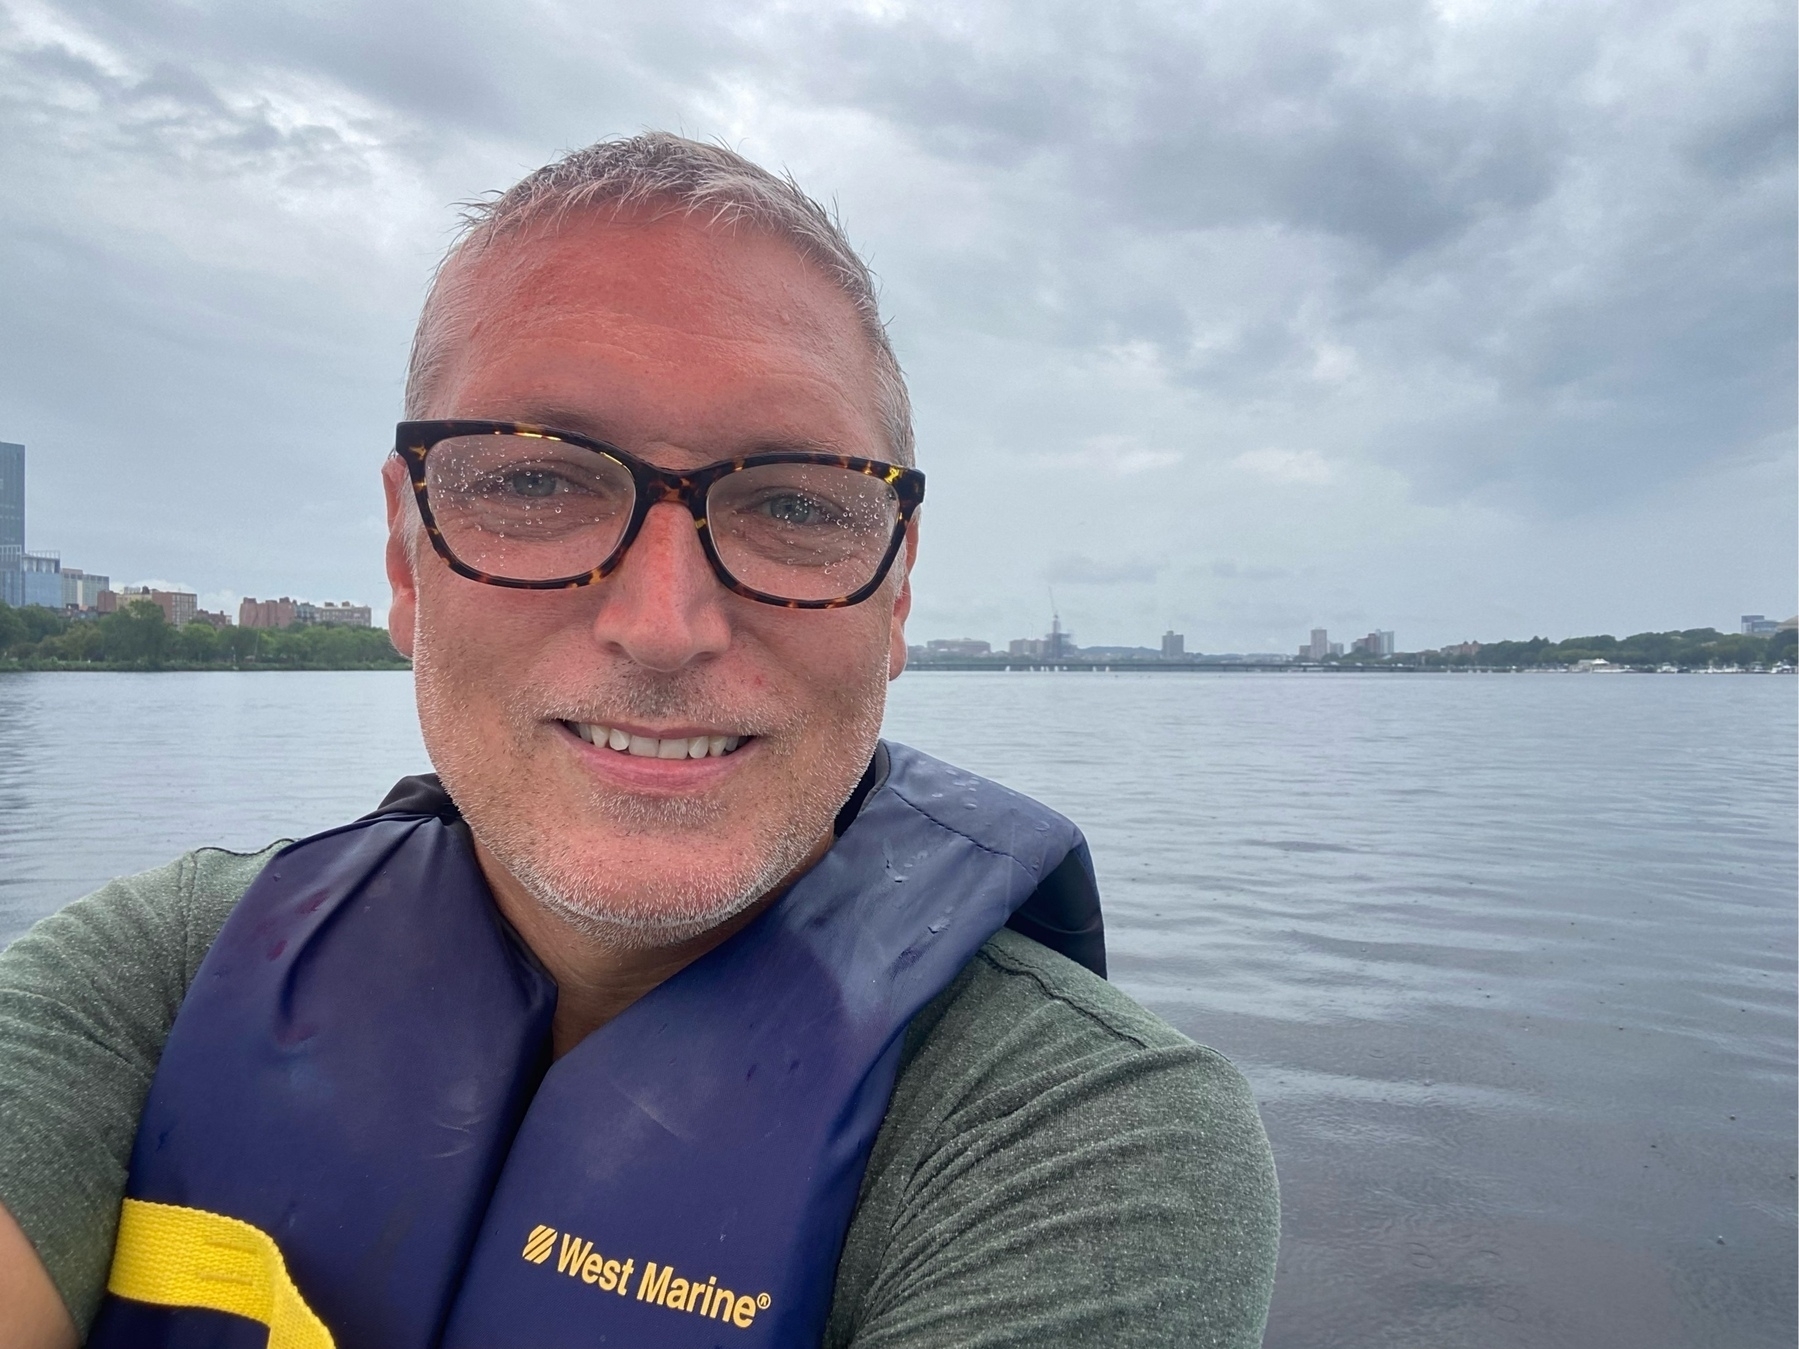 selfie wearing a life jacket with glasses sprinkled with water. open water behind.